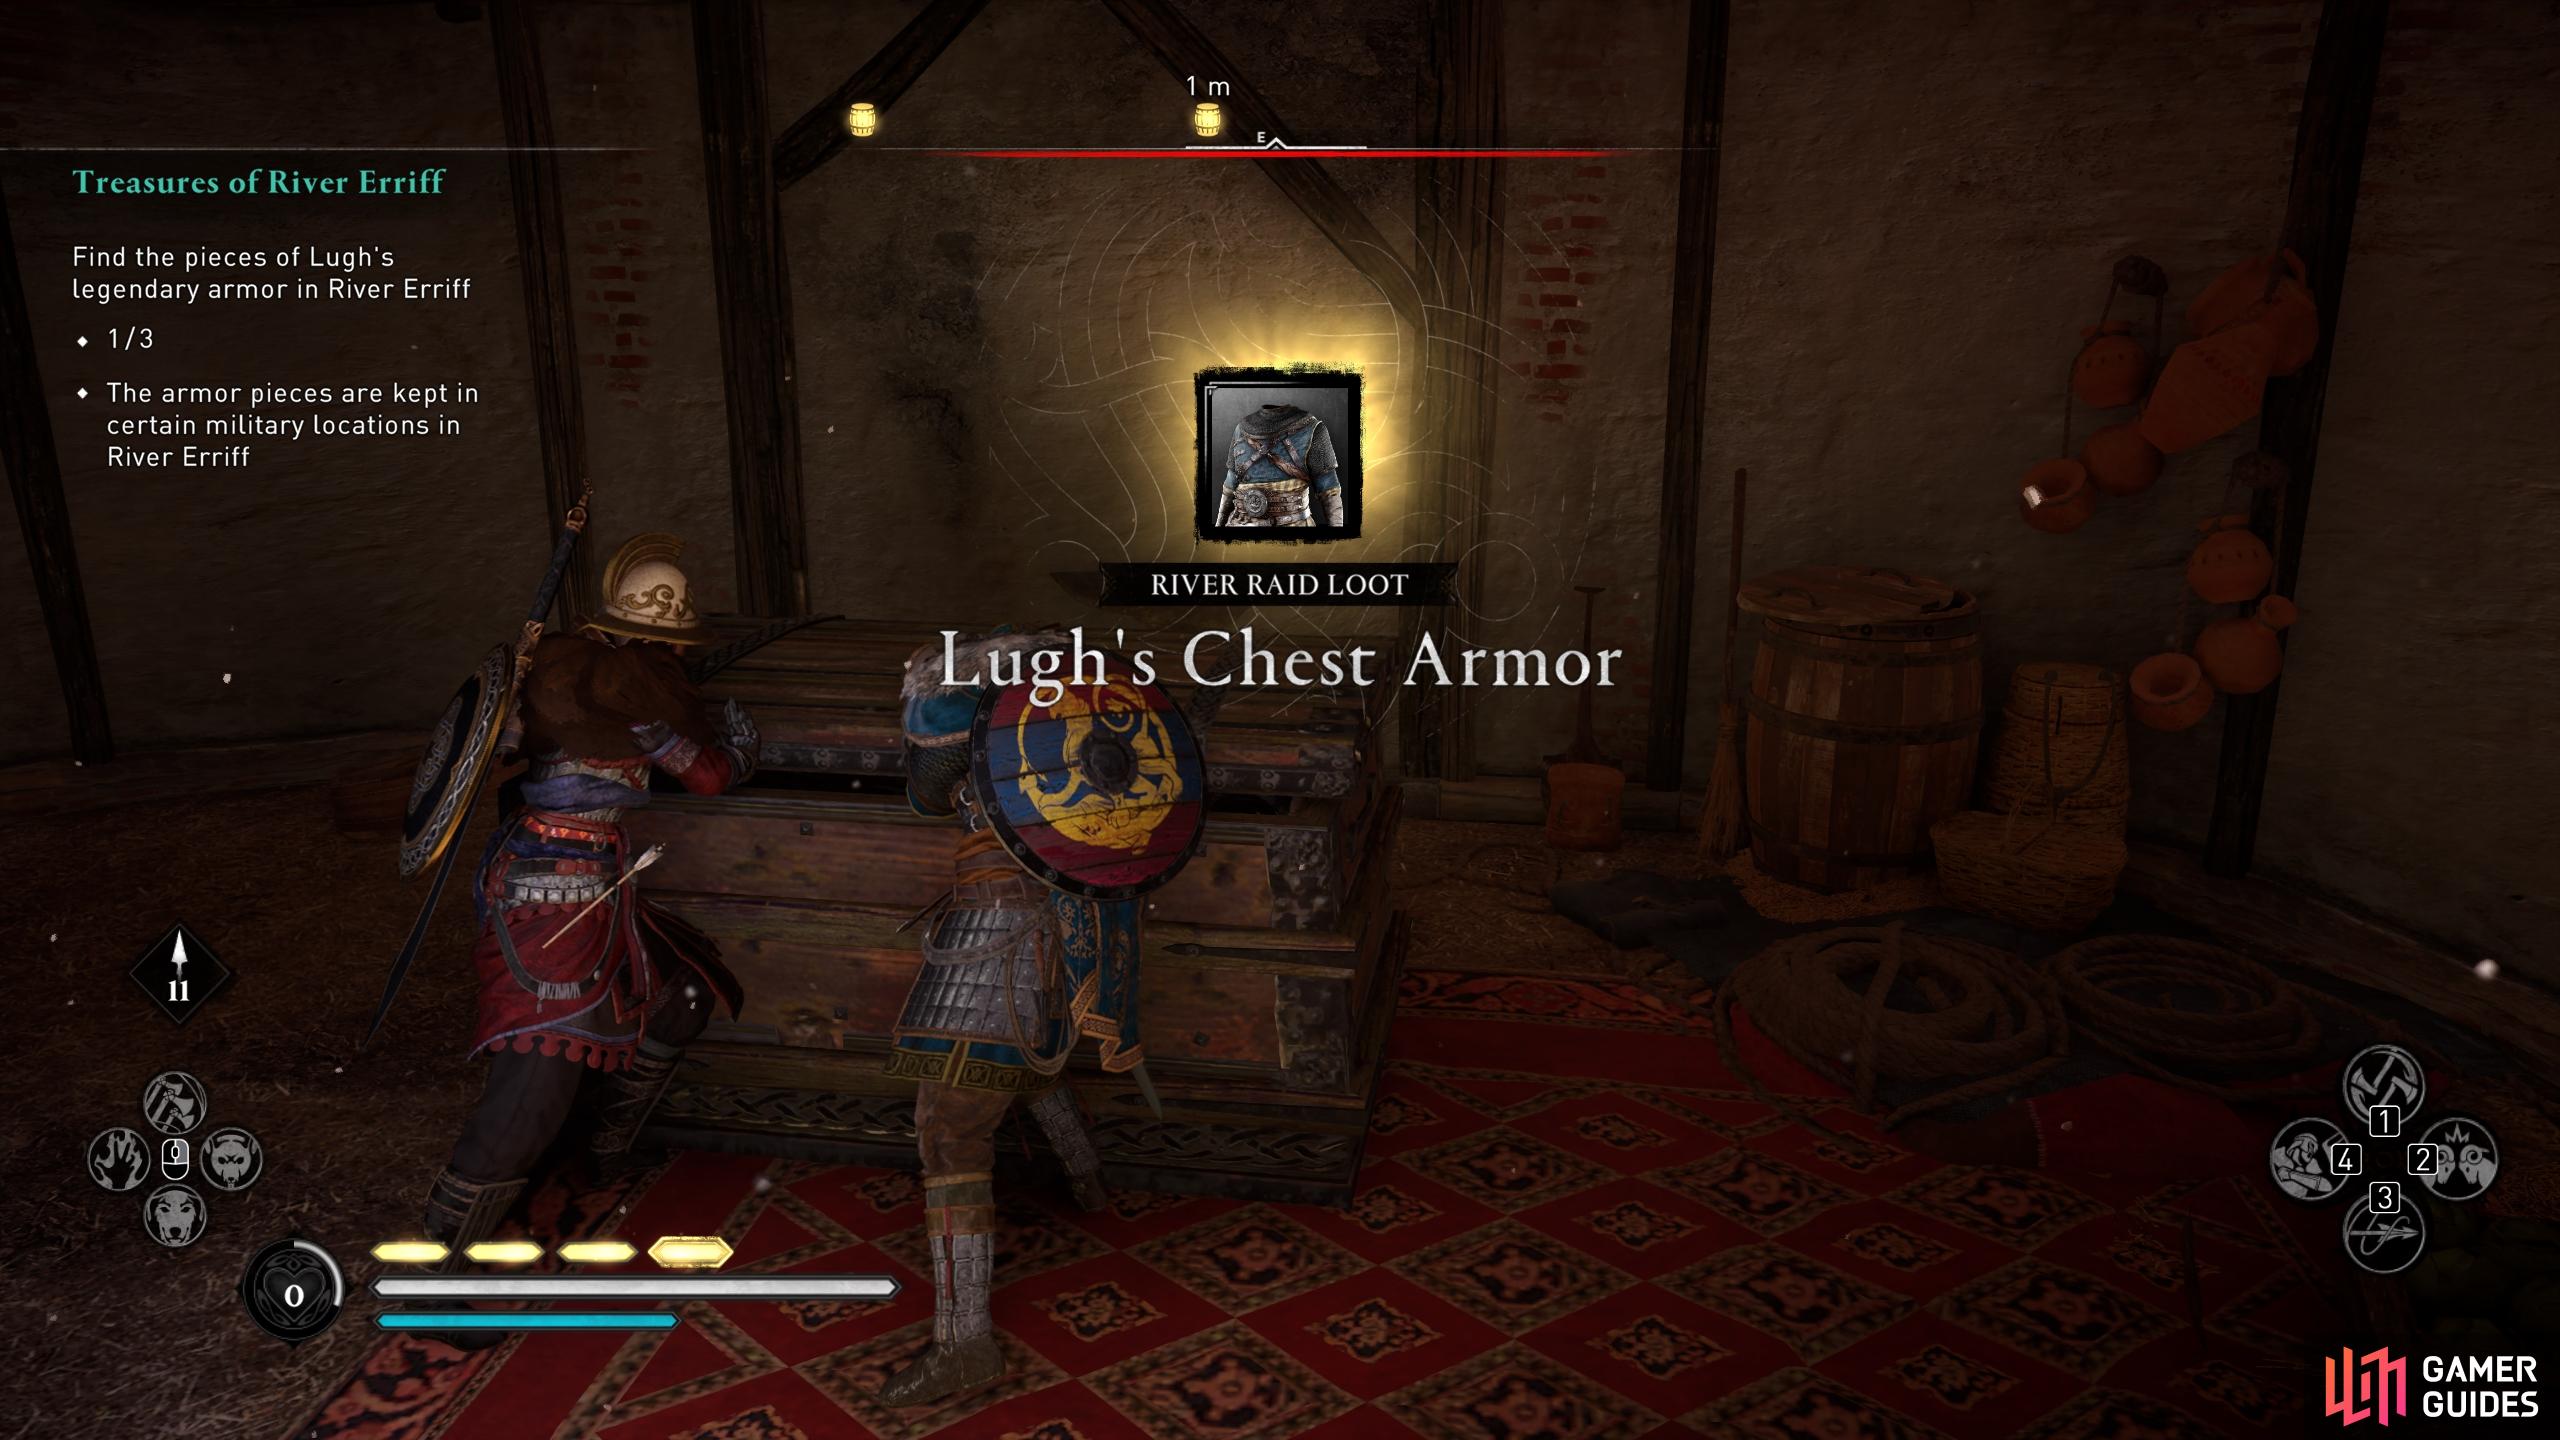 Youll find the Lughs Chest Armor in a regular wealth chest.